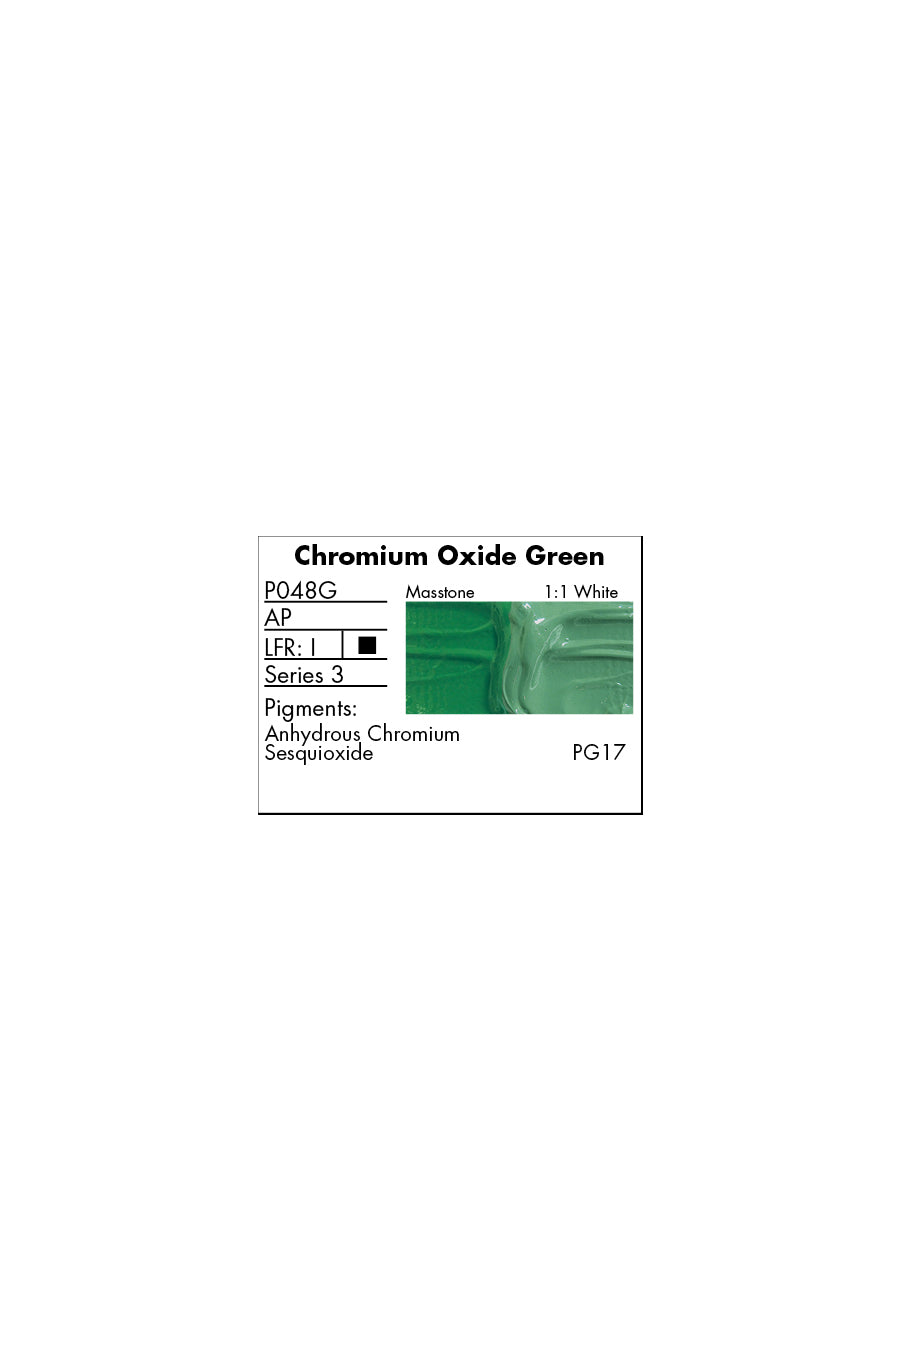 Grumbacher® Pre-tested® Oil Green Color Family